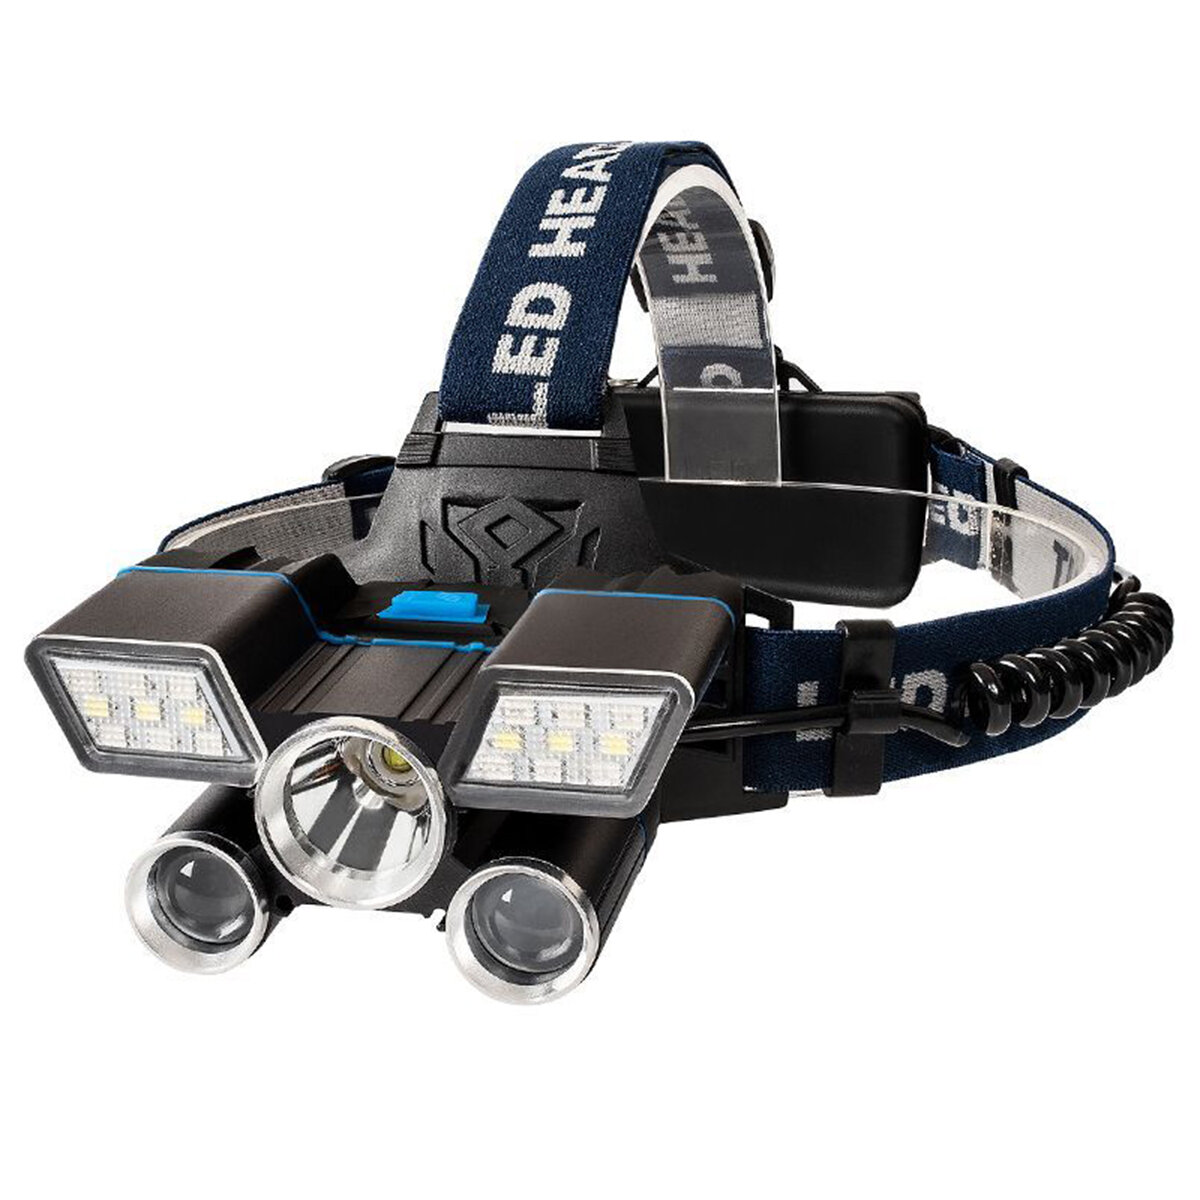 

BIKIGHT 21 LEDs 9-Modes USB Rechargeable LED Headlamp Outdoor Cycling Headlight Camping Light Waterproof LED Torch Lamp